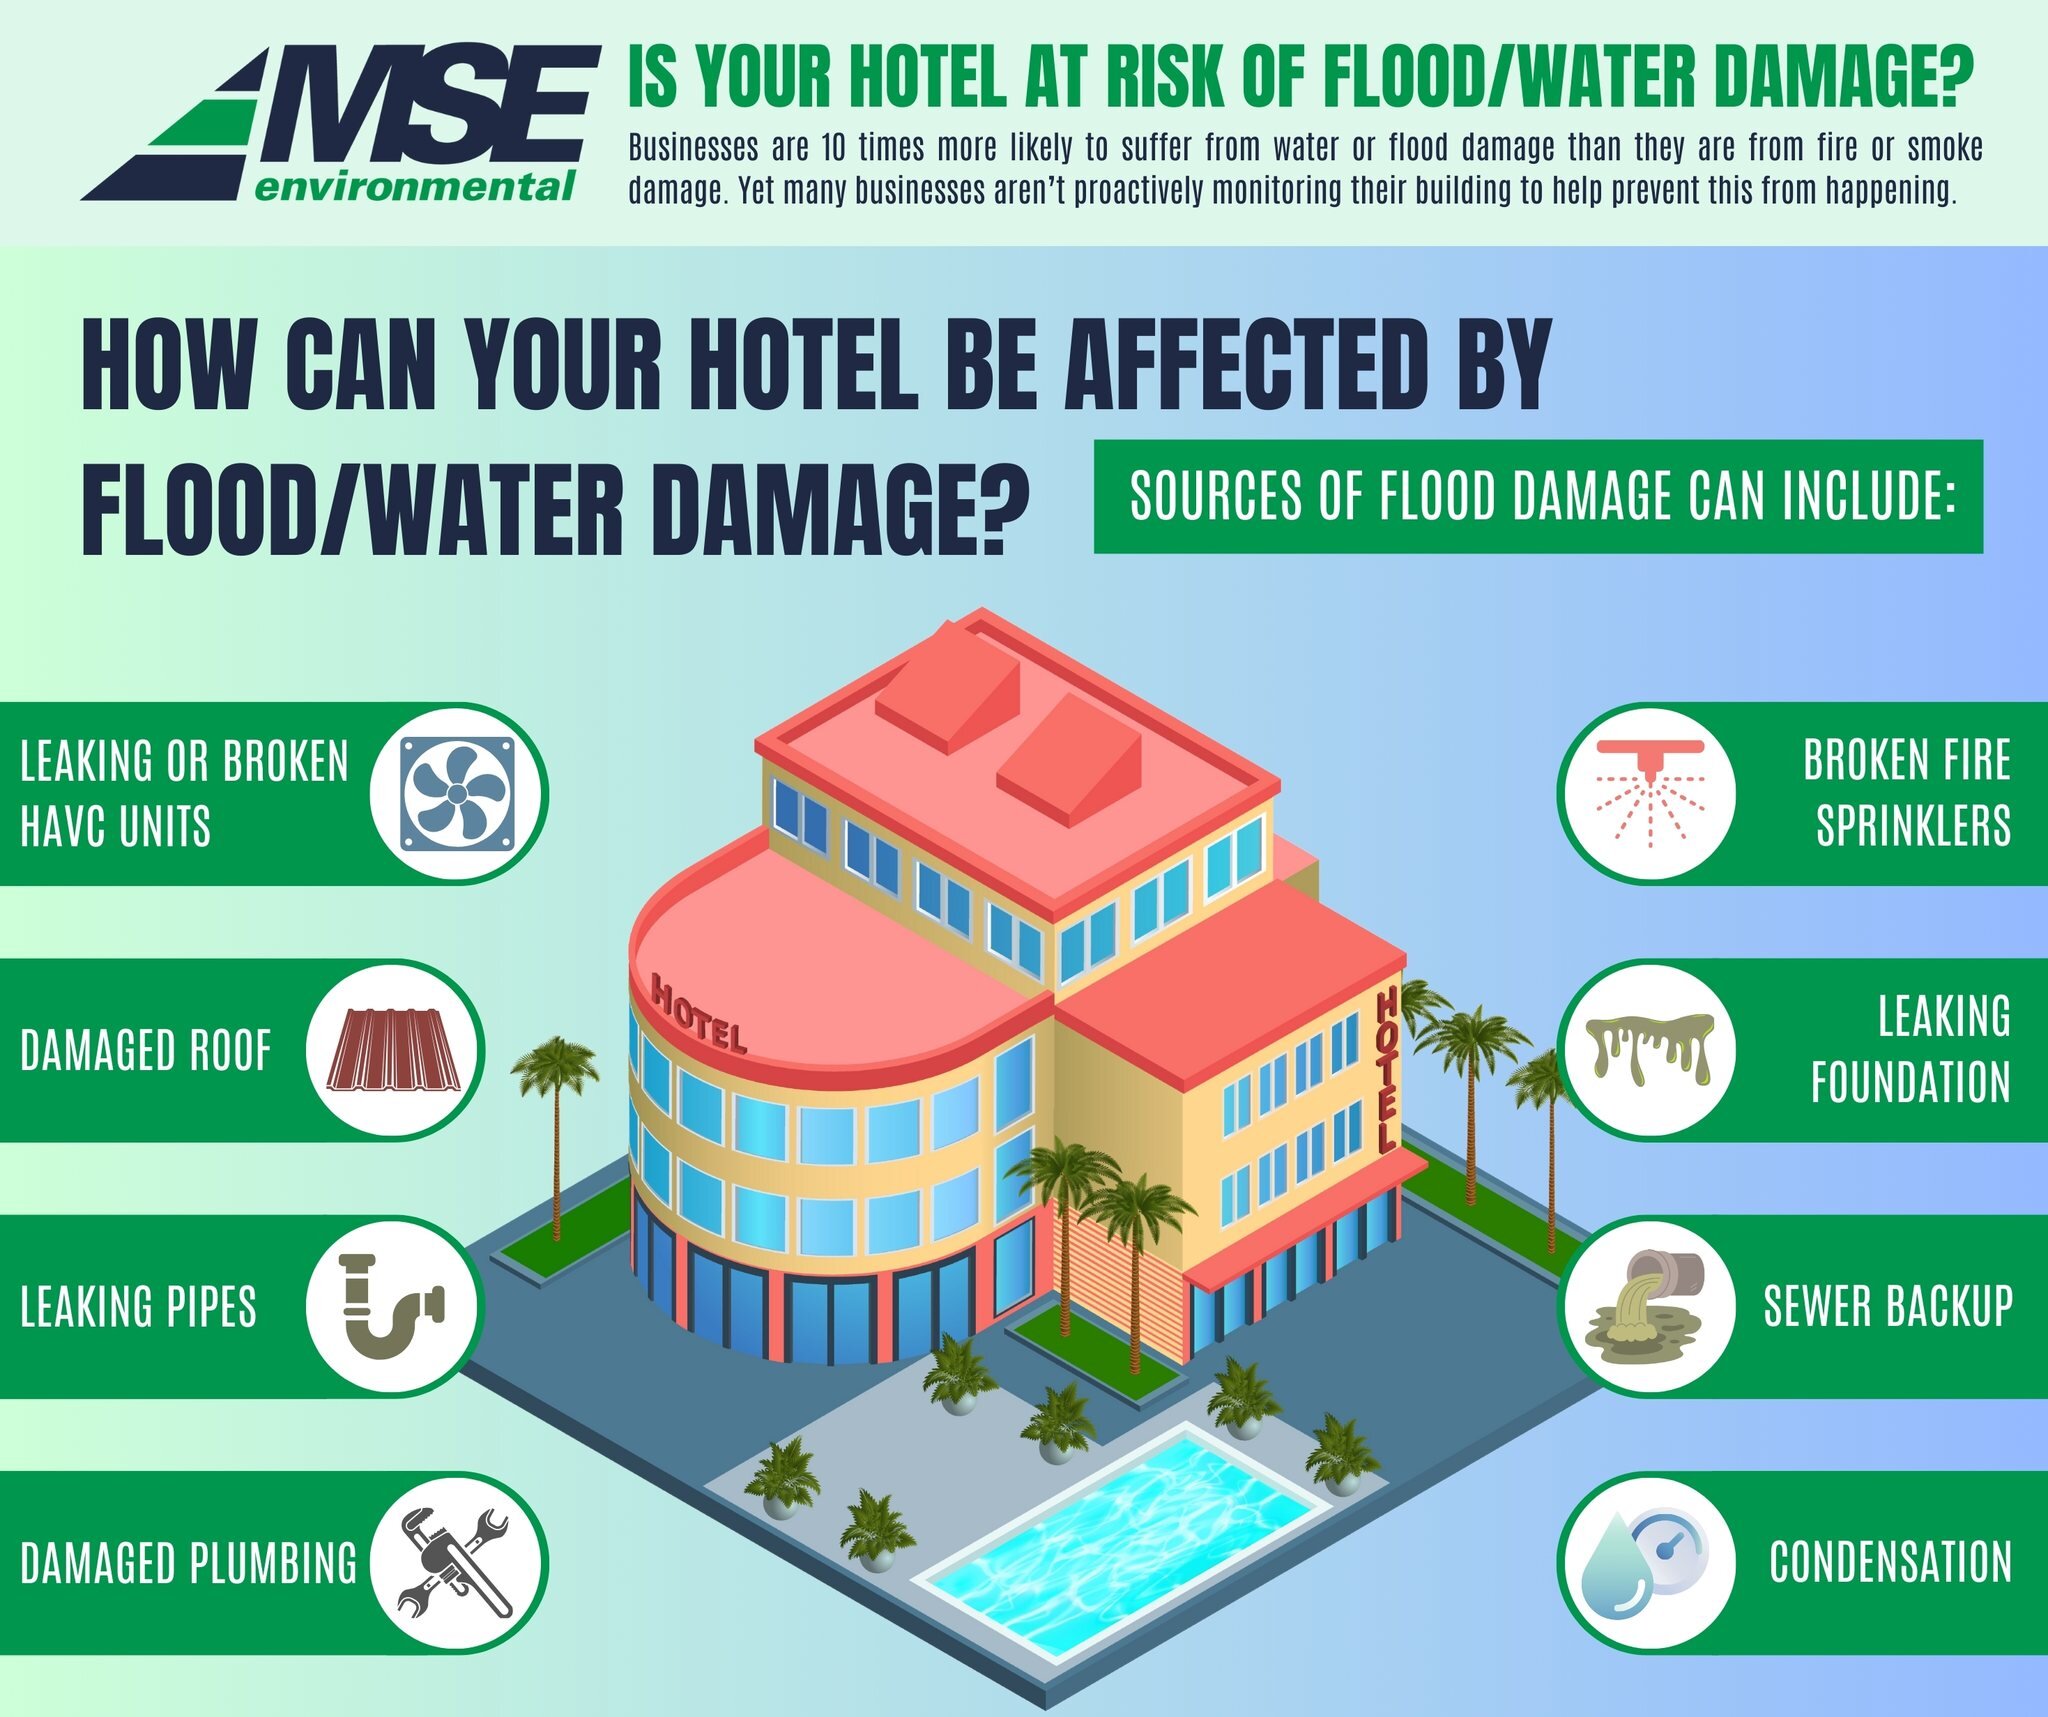 Is Your Hotel Prepared for Potential Flood or Water Damage?

Don't wait for disaster to strike! Assess your property's vulnerability and implement proactive measures to mitigate the risks of flooding and water damage. Your guests' safety and comfort 